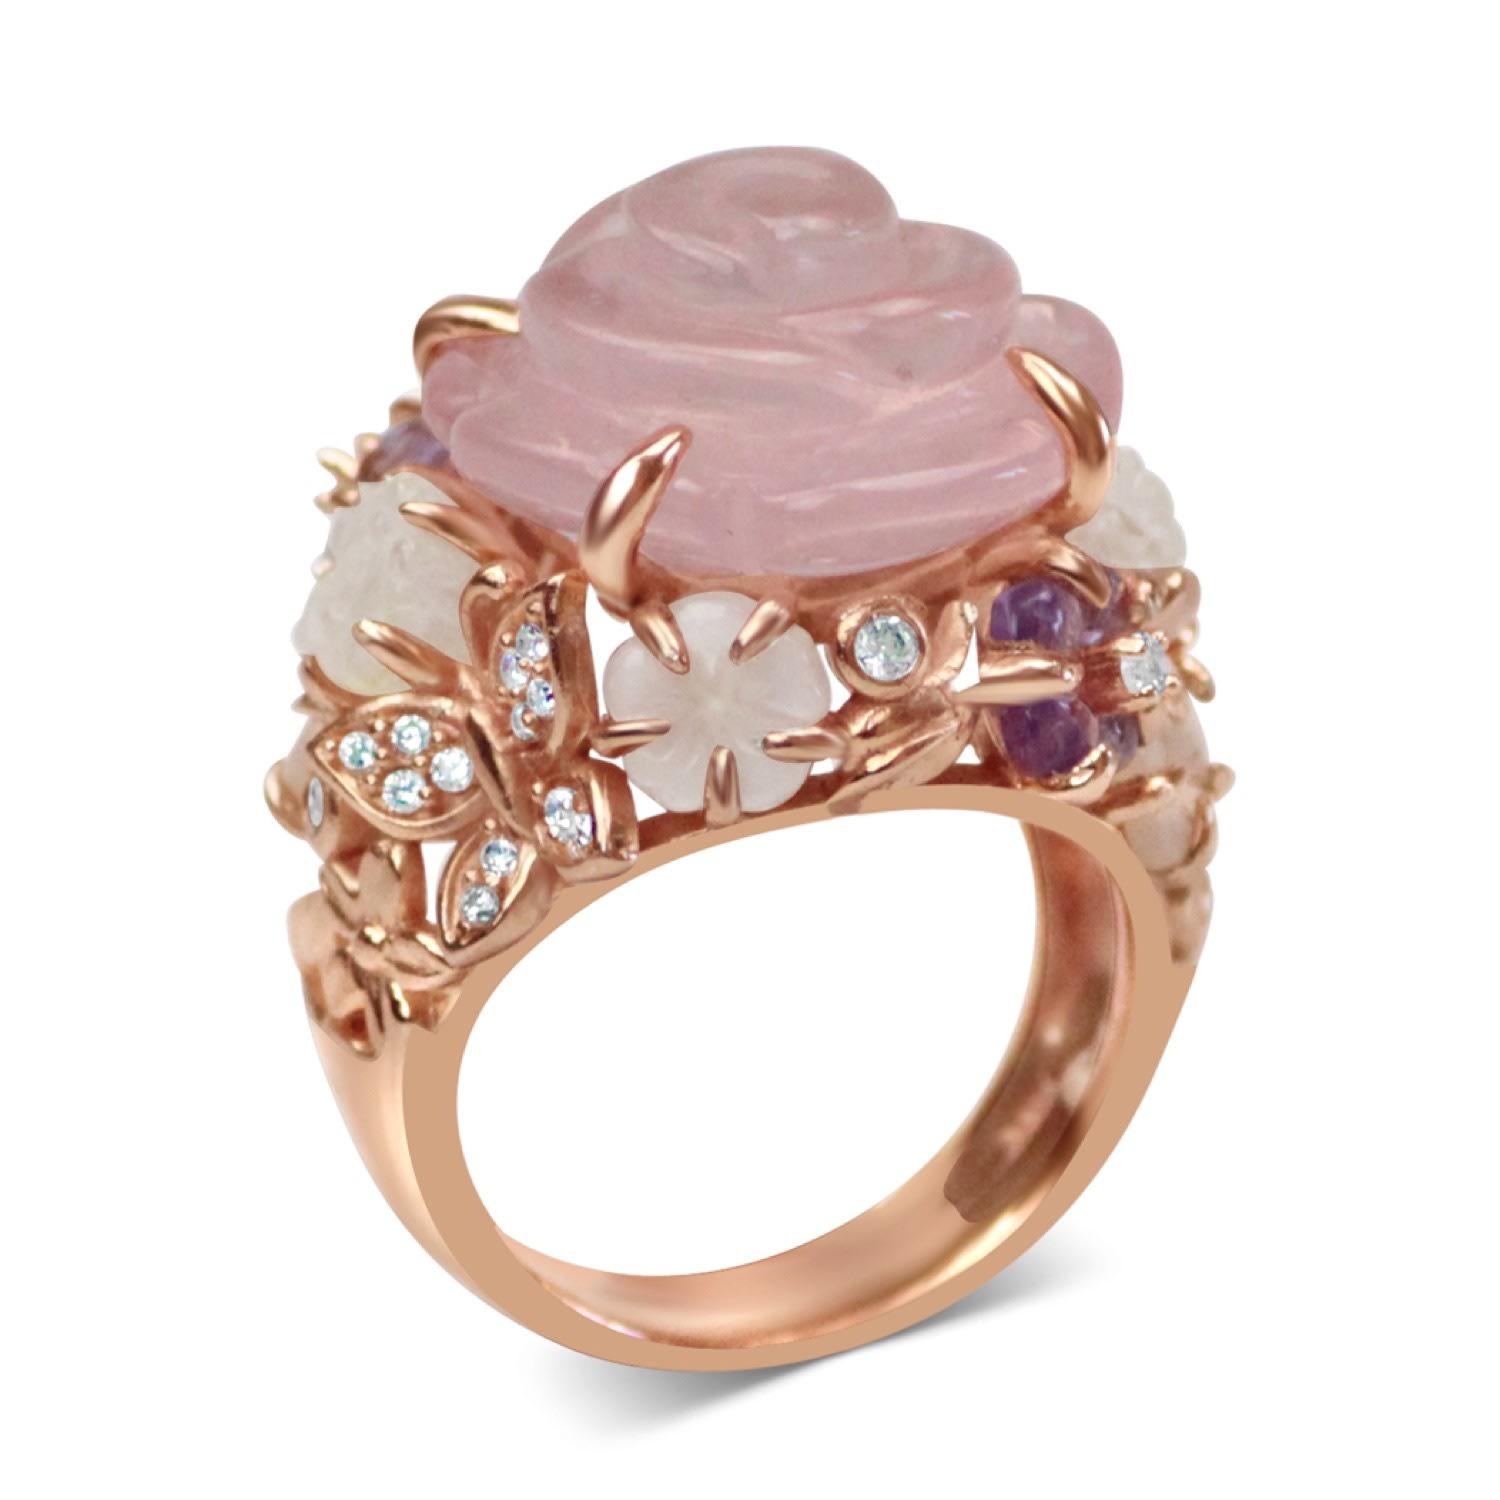 Bellus Domina Gold Plated Quartz Cocktail Ring in Pink / Purple (Pink ...